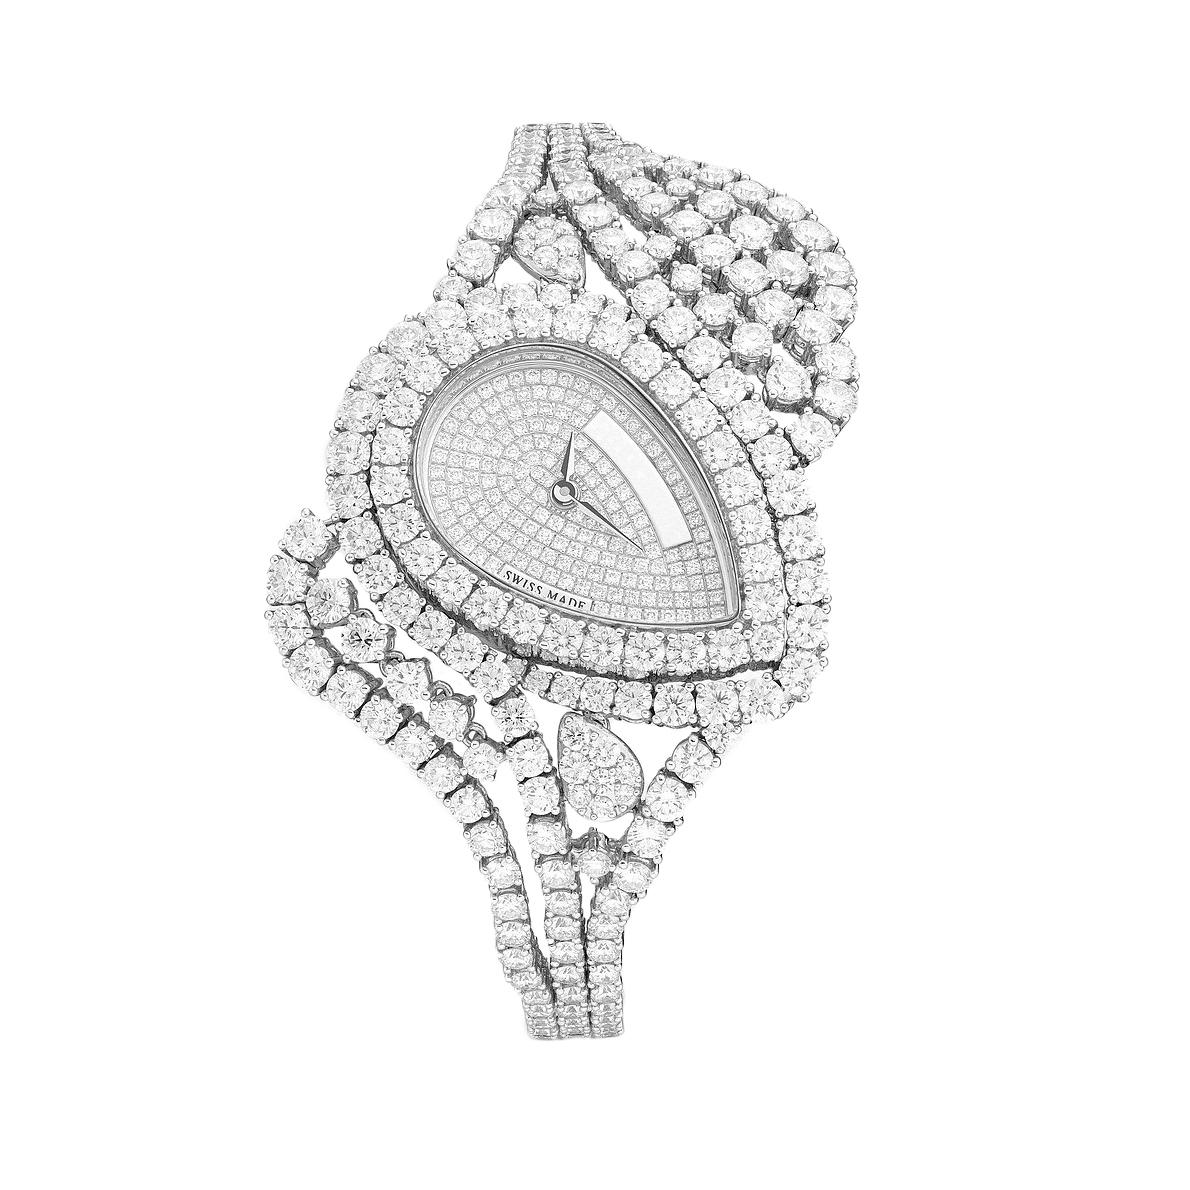 Watch in white gold 18kt set with 478 diamonds 20.22 cts on case dial and bracelet quartz movement.

We do not guarantee the functioning of this watch.